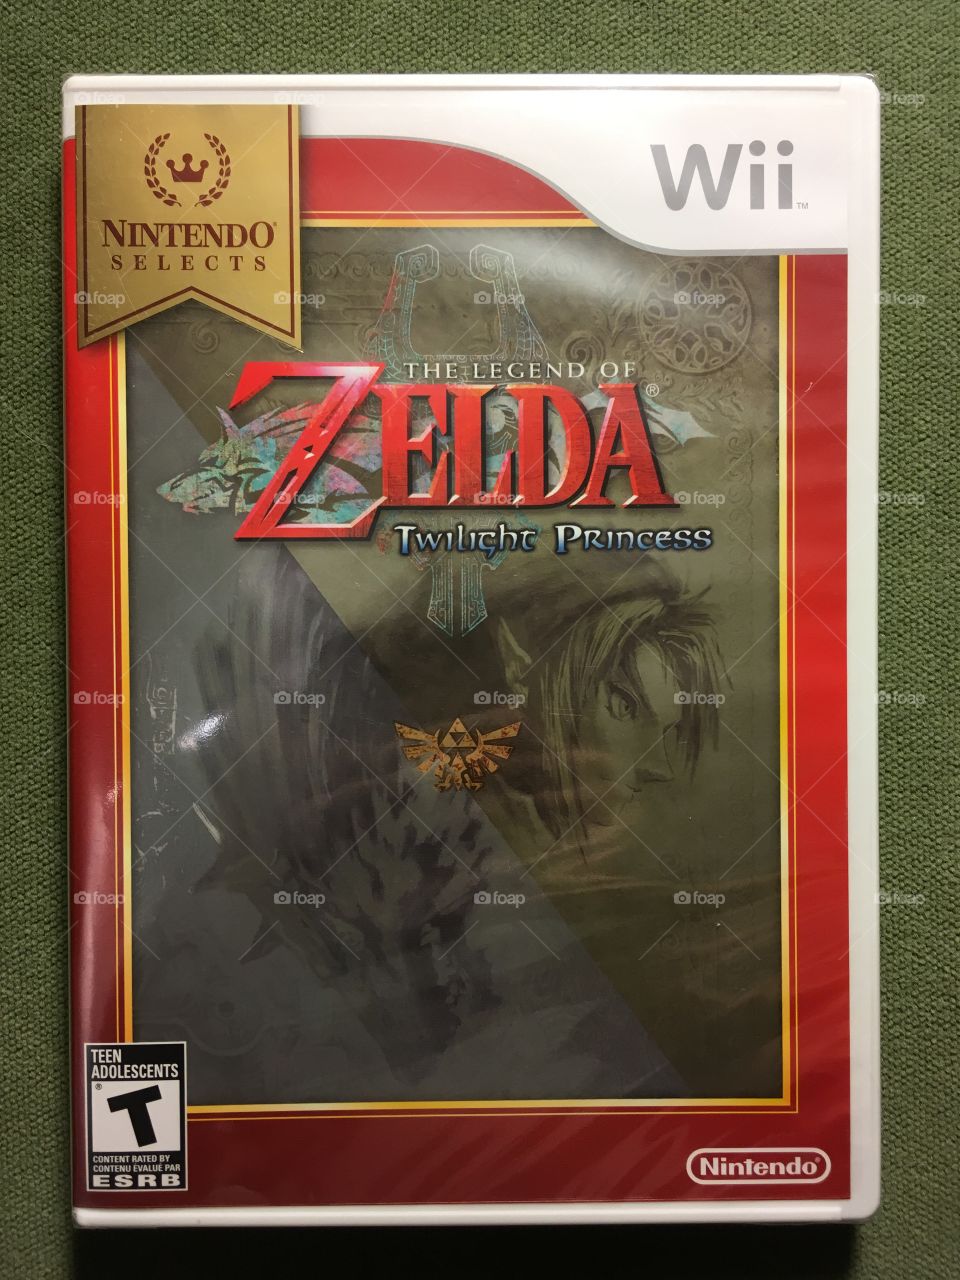 The legend of Zelda - Twilight princess - by Nintendo selects
Video game for Nintendo Wii
Brand New Sealed
Released - 2011